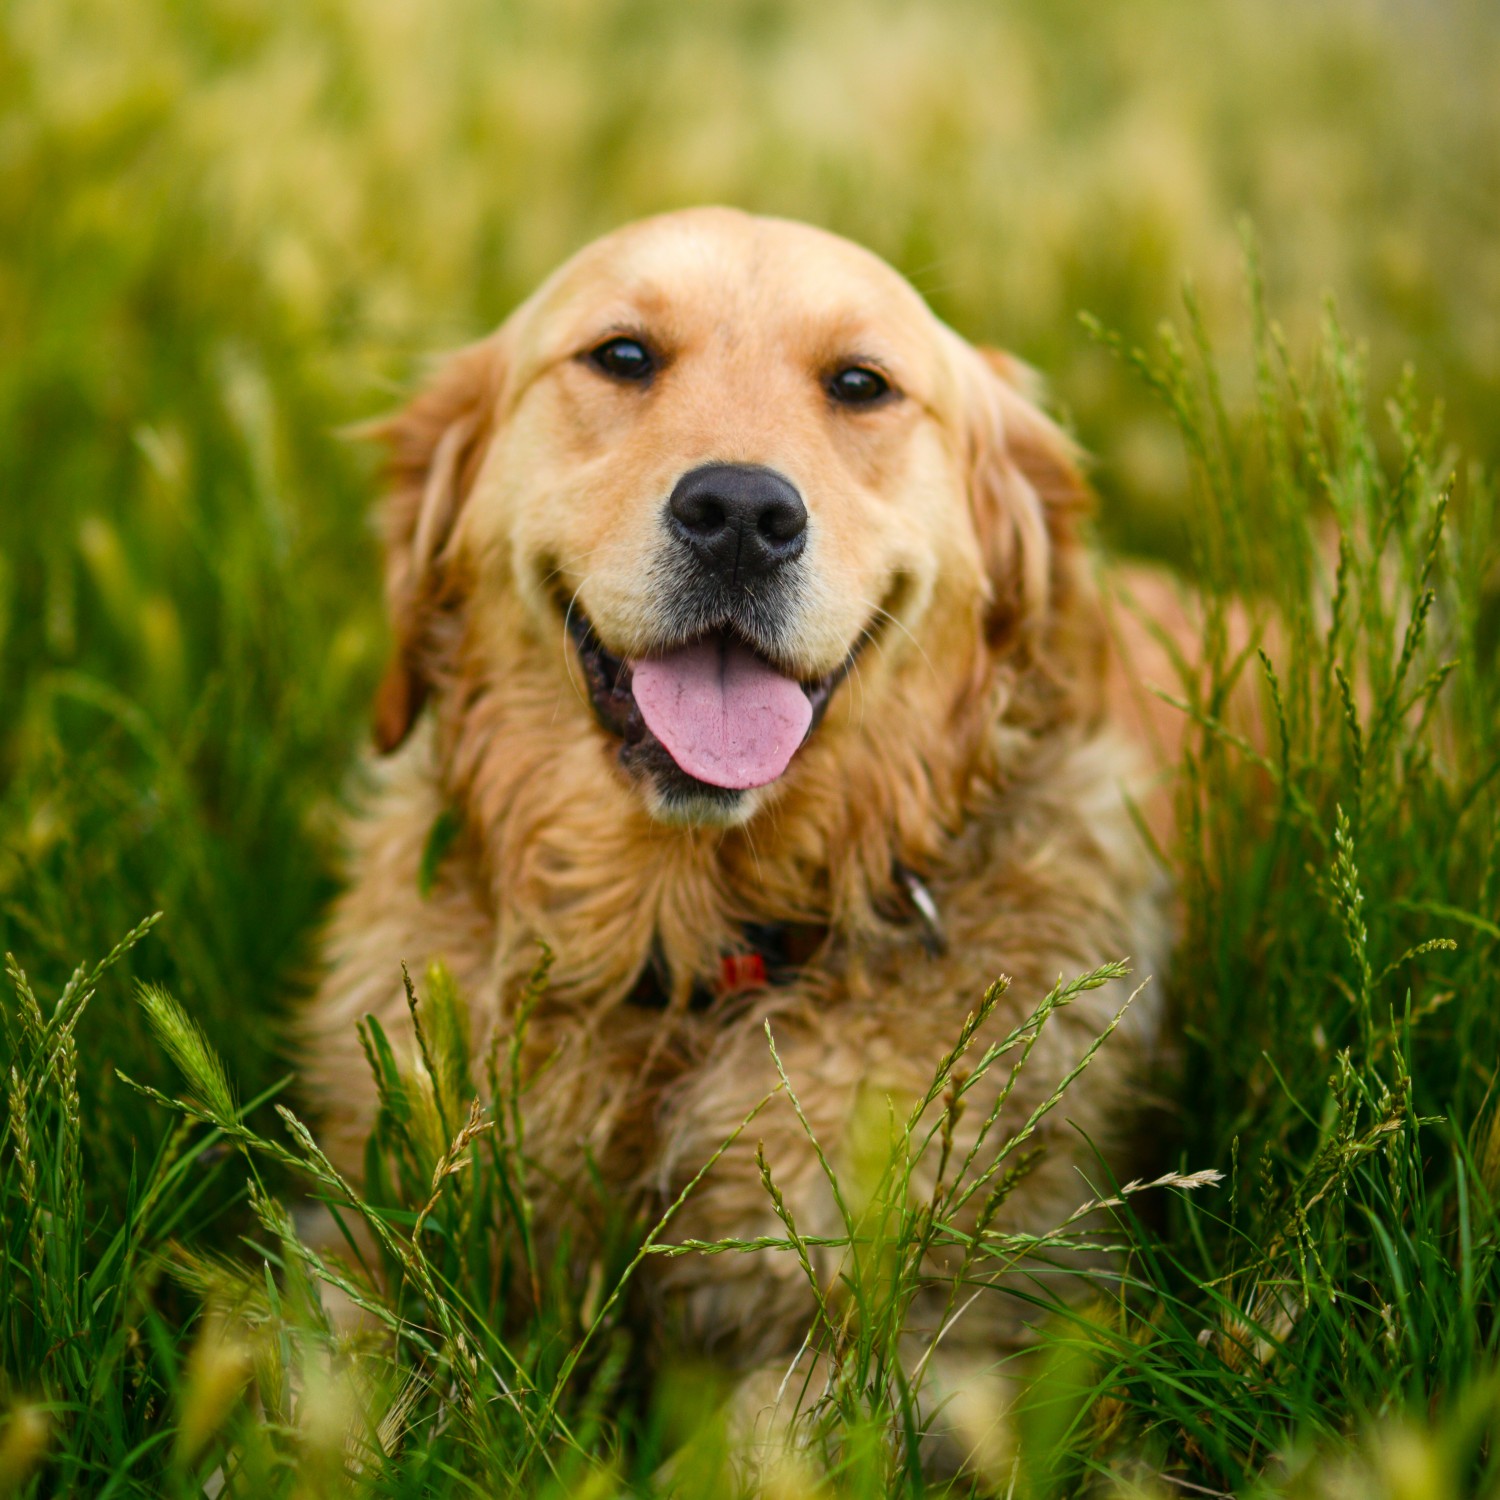 Smiling Golden Retriever laying in grass